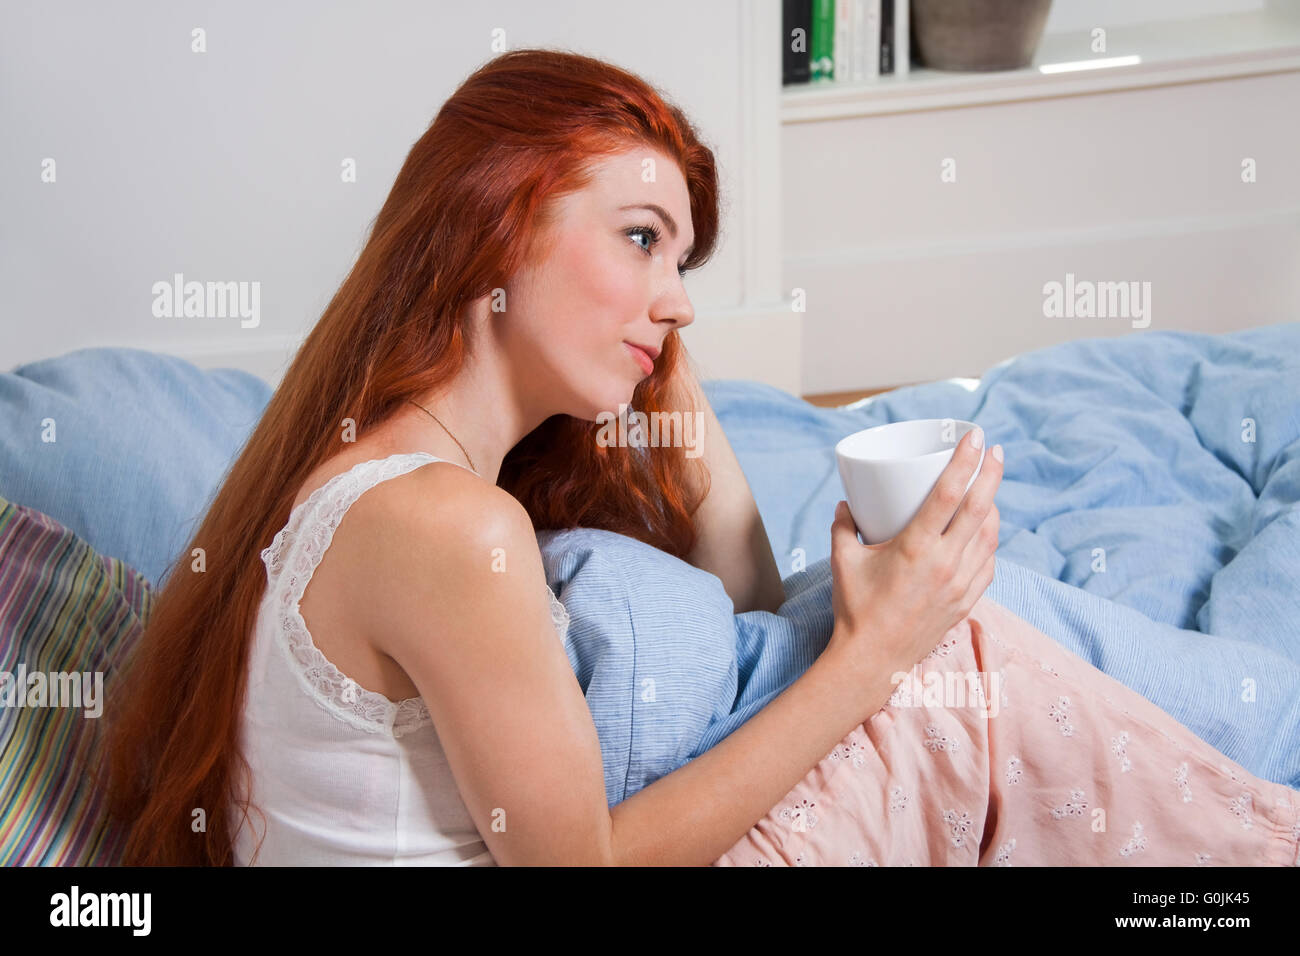 Pensive Woman Having an Early Coffee at her Bed Stock Photo